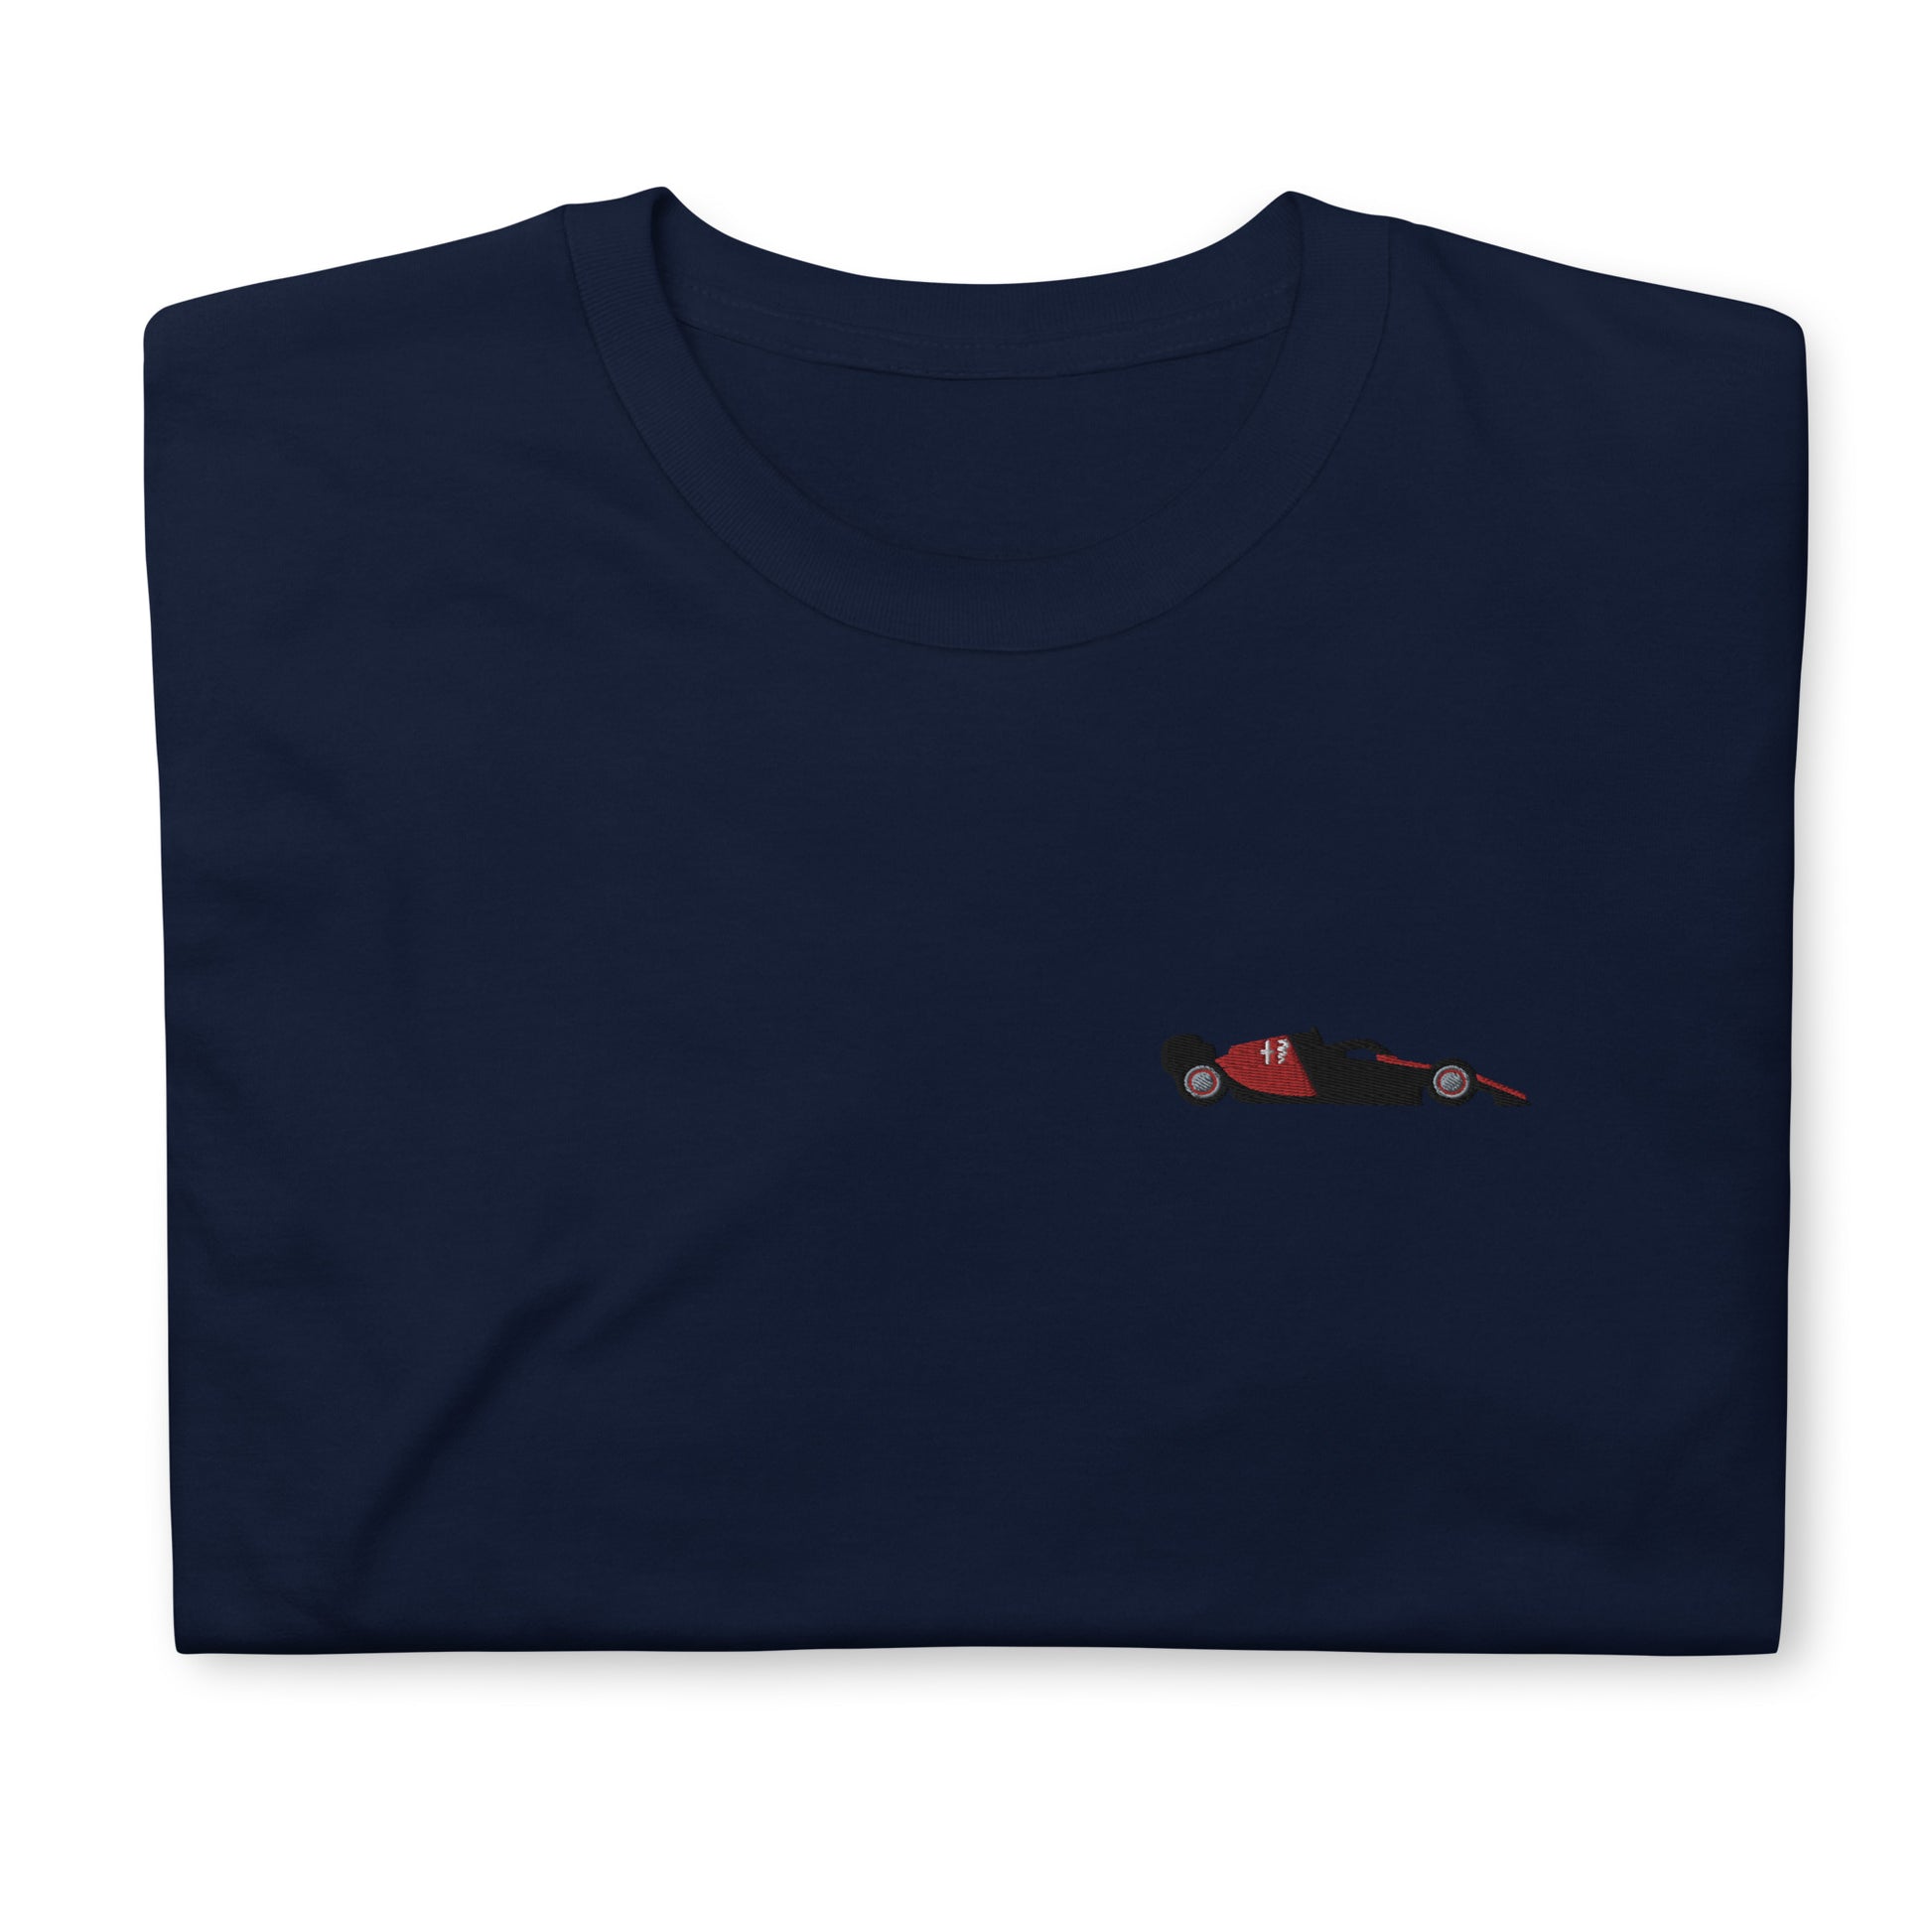 Embroidered Alfa Romeo F1 Car Unisex T-Shirt navy blue front